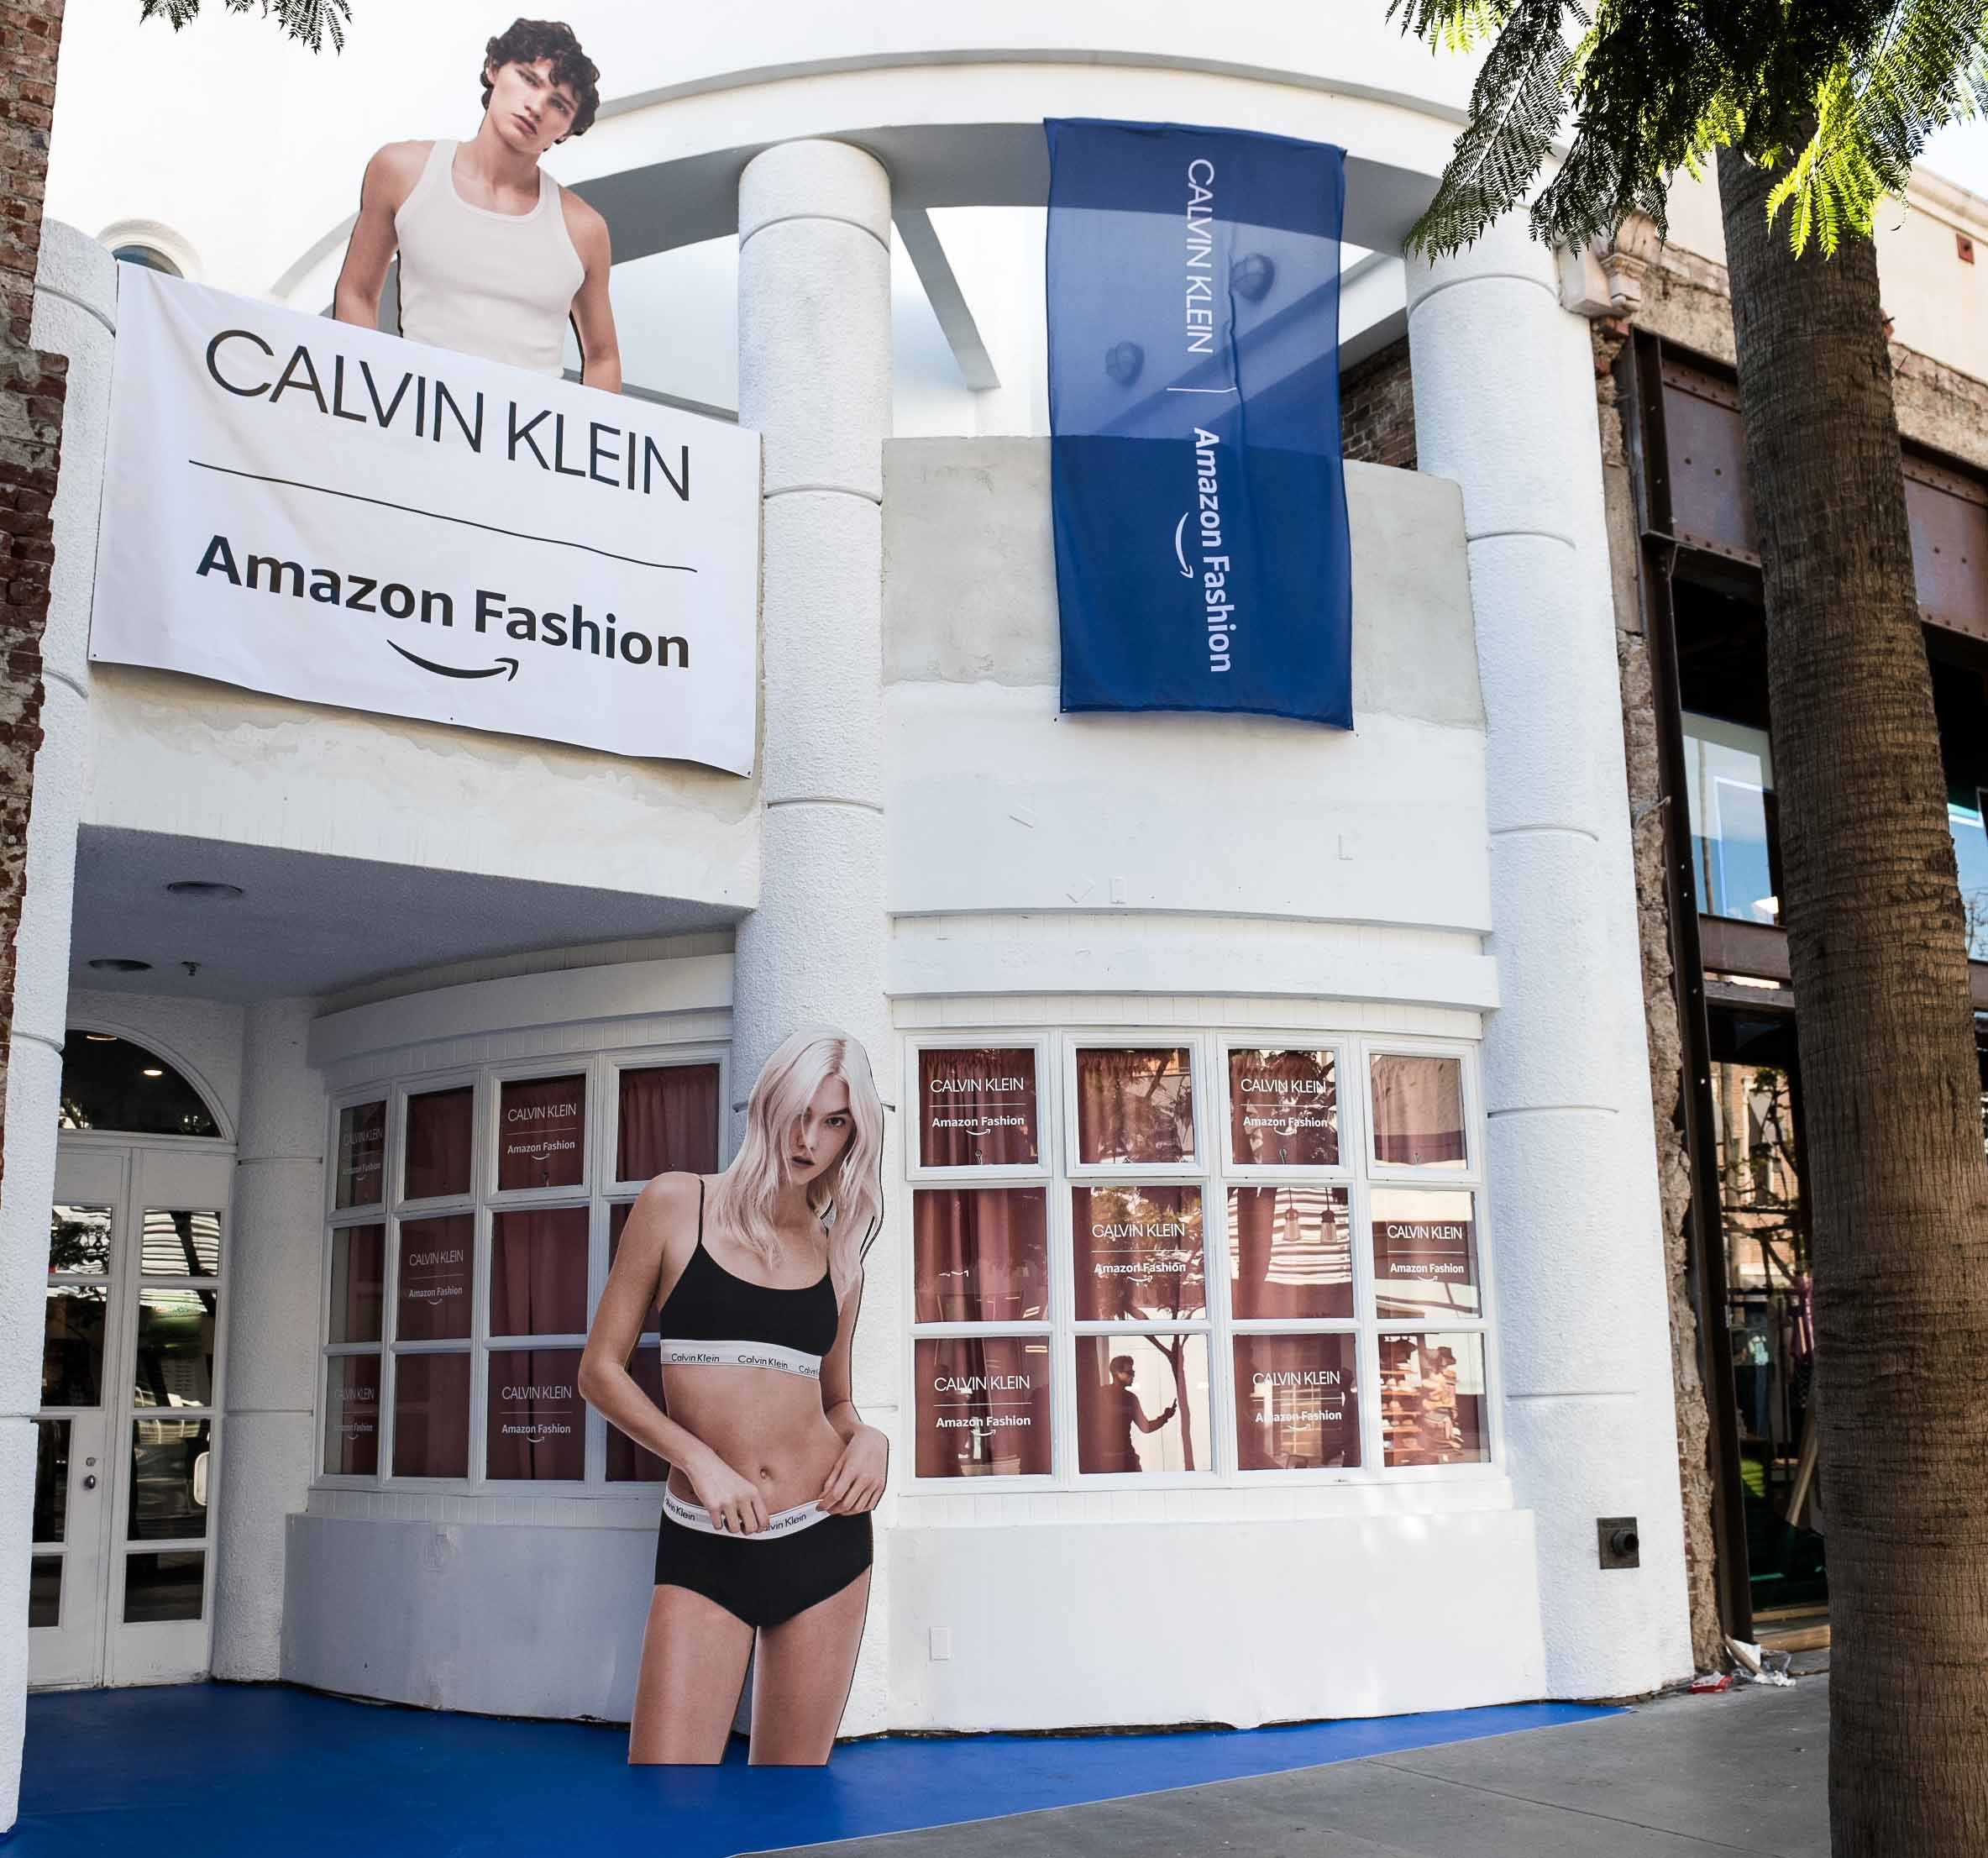 Calvin Klein, Inc. Announces Holiday Retail Experience with Amazon Fashion  | Business Wire